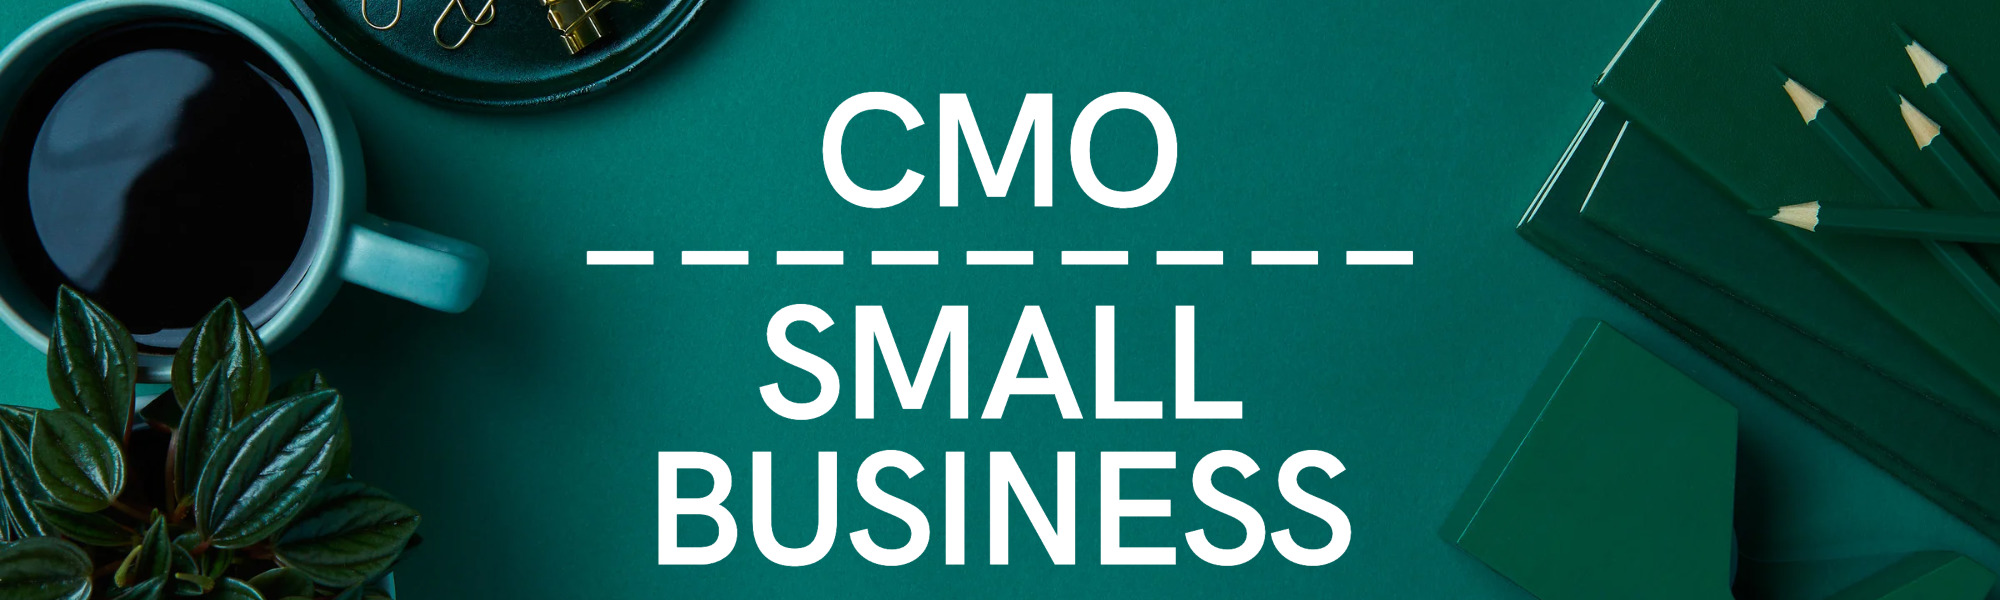 The Benefits of Having a Fractional CMO for Small Businesses